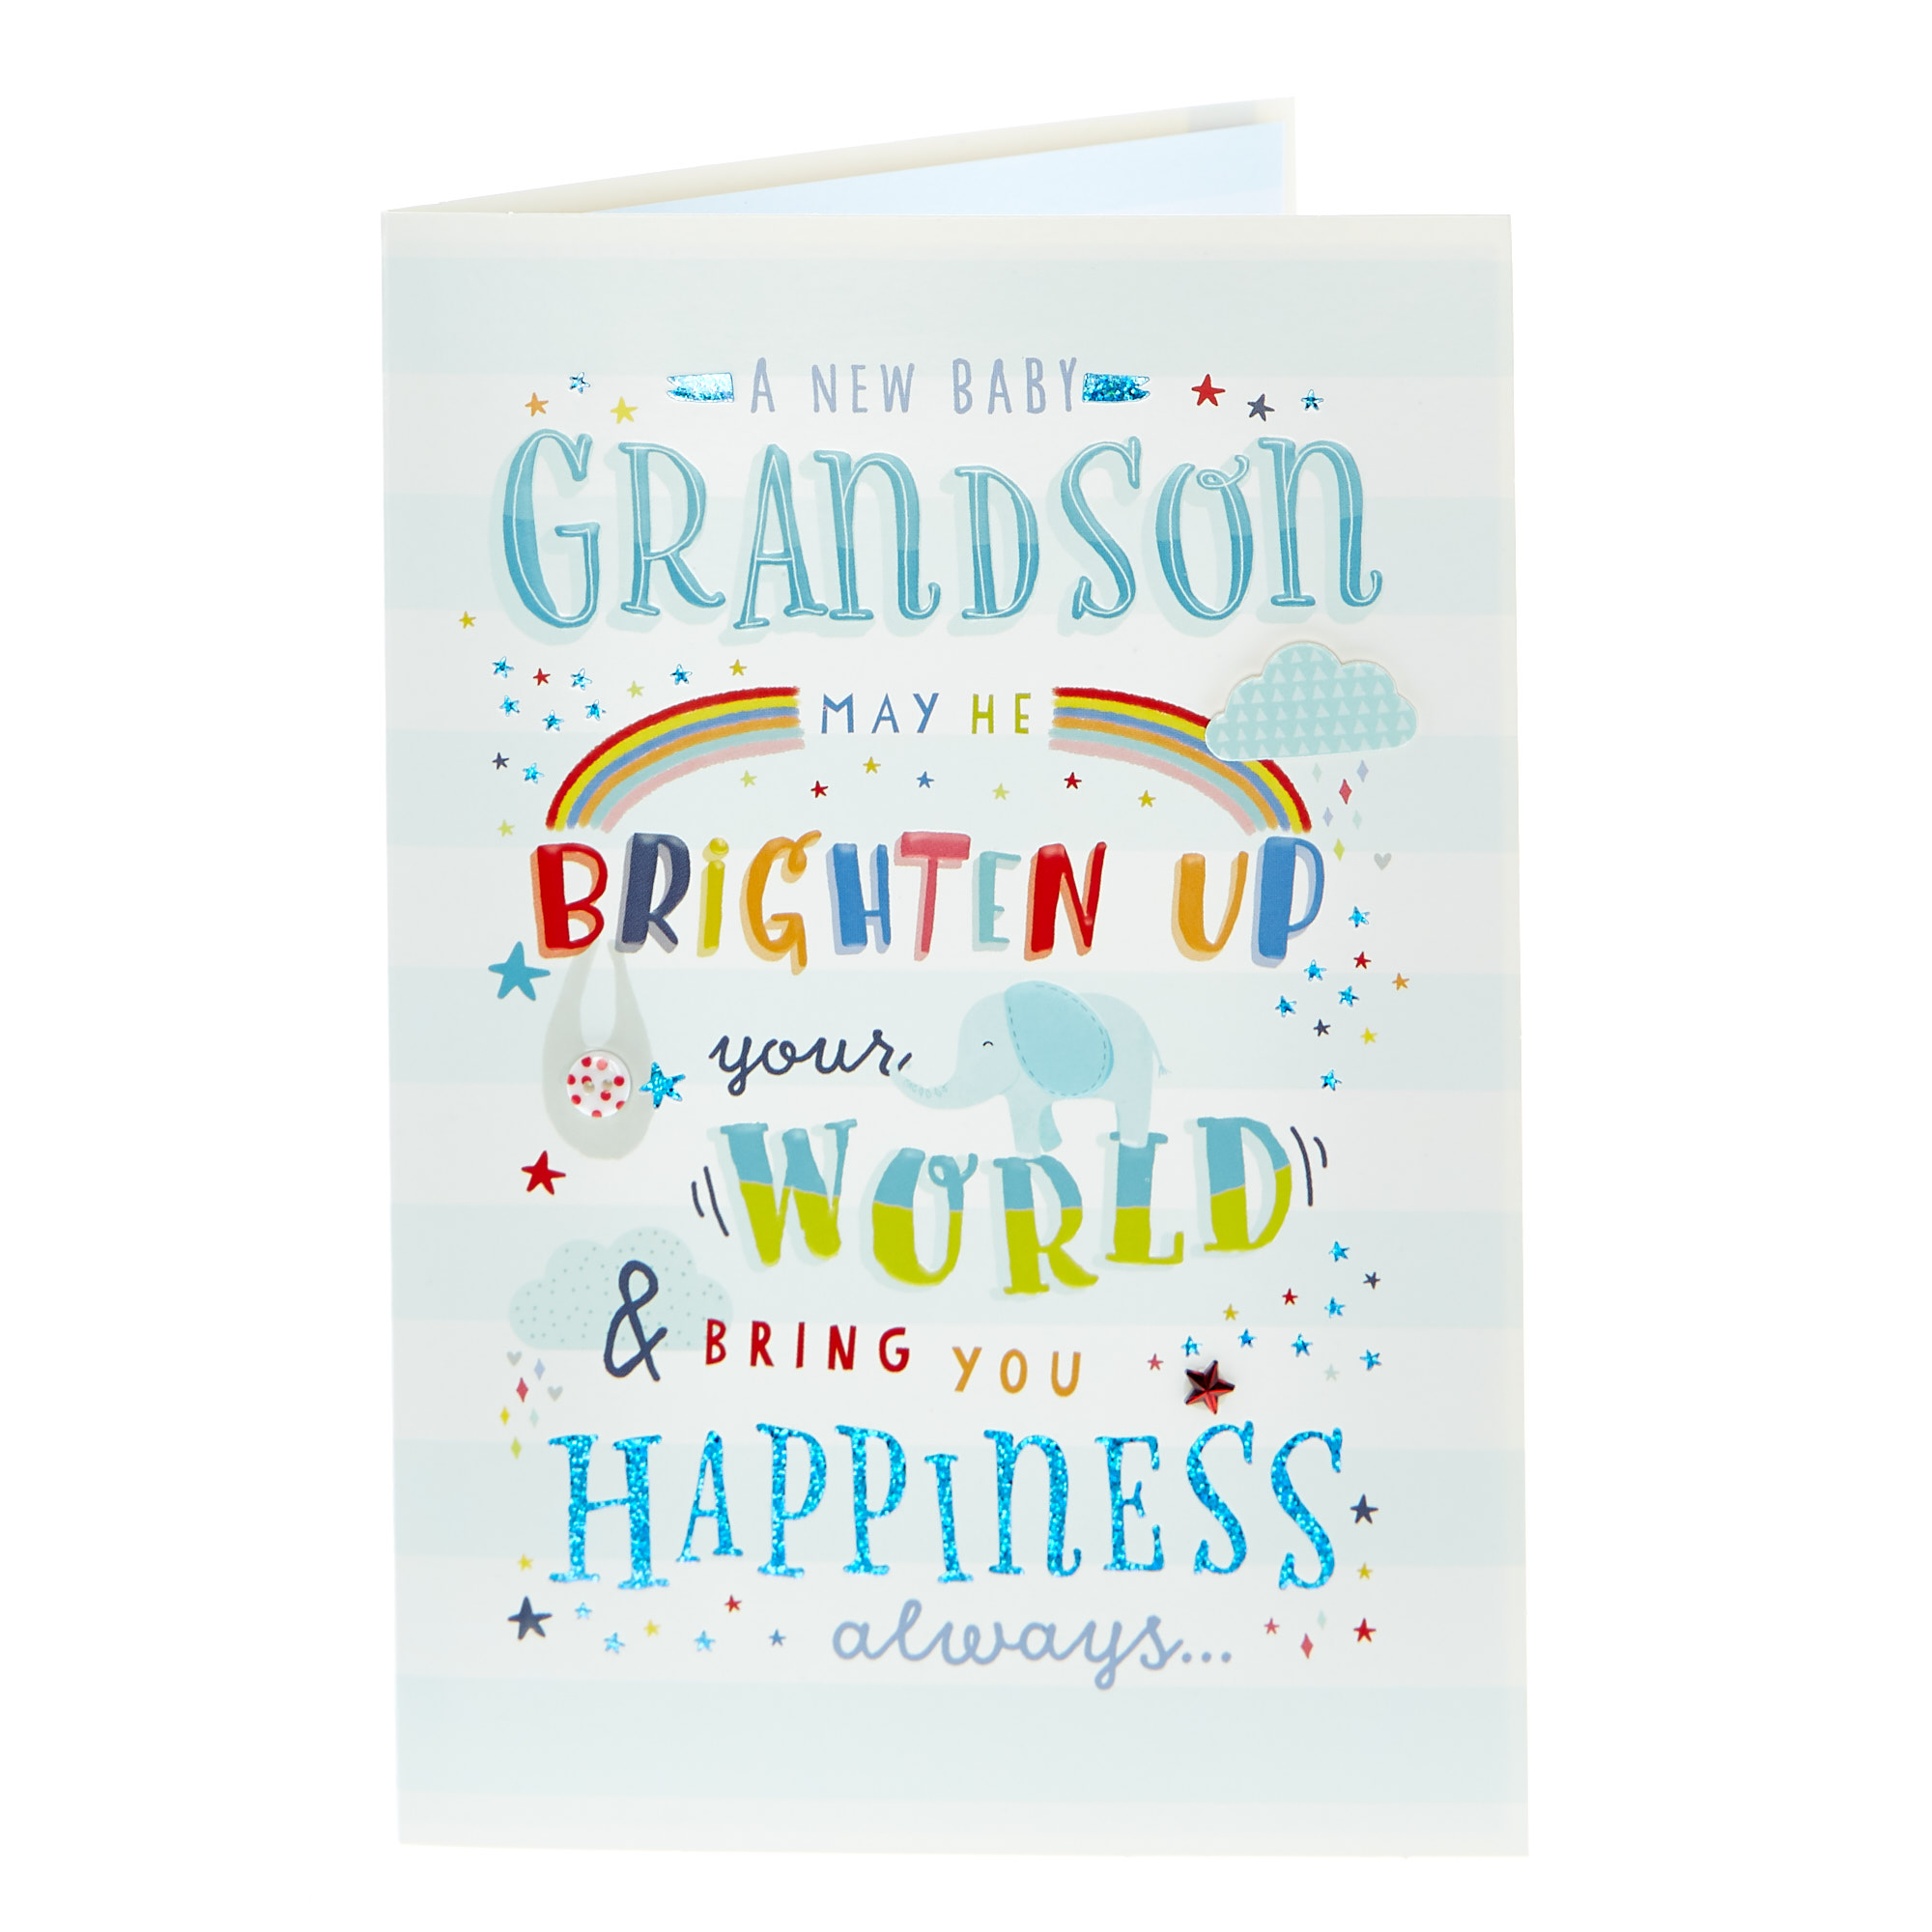 New Baby Card - Grandson, Happiness